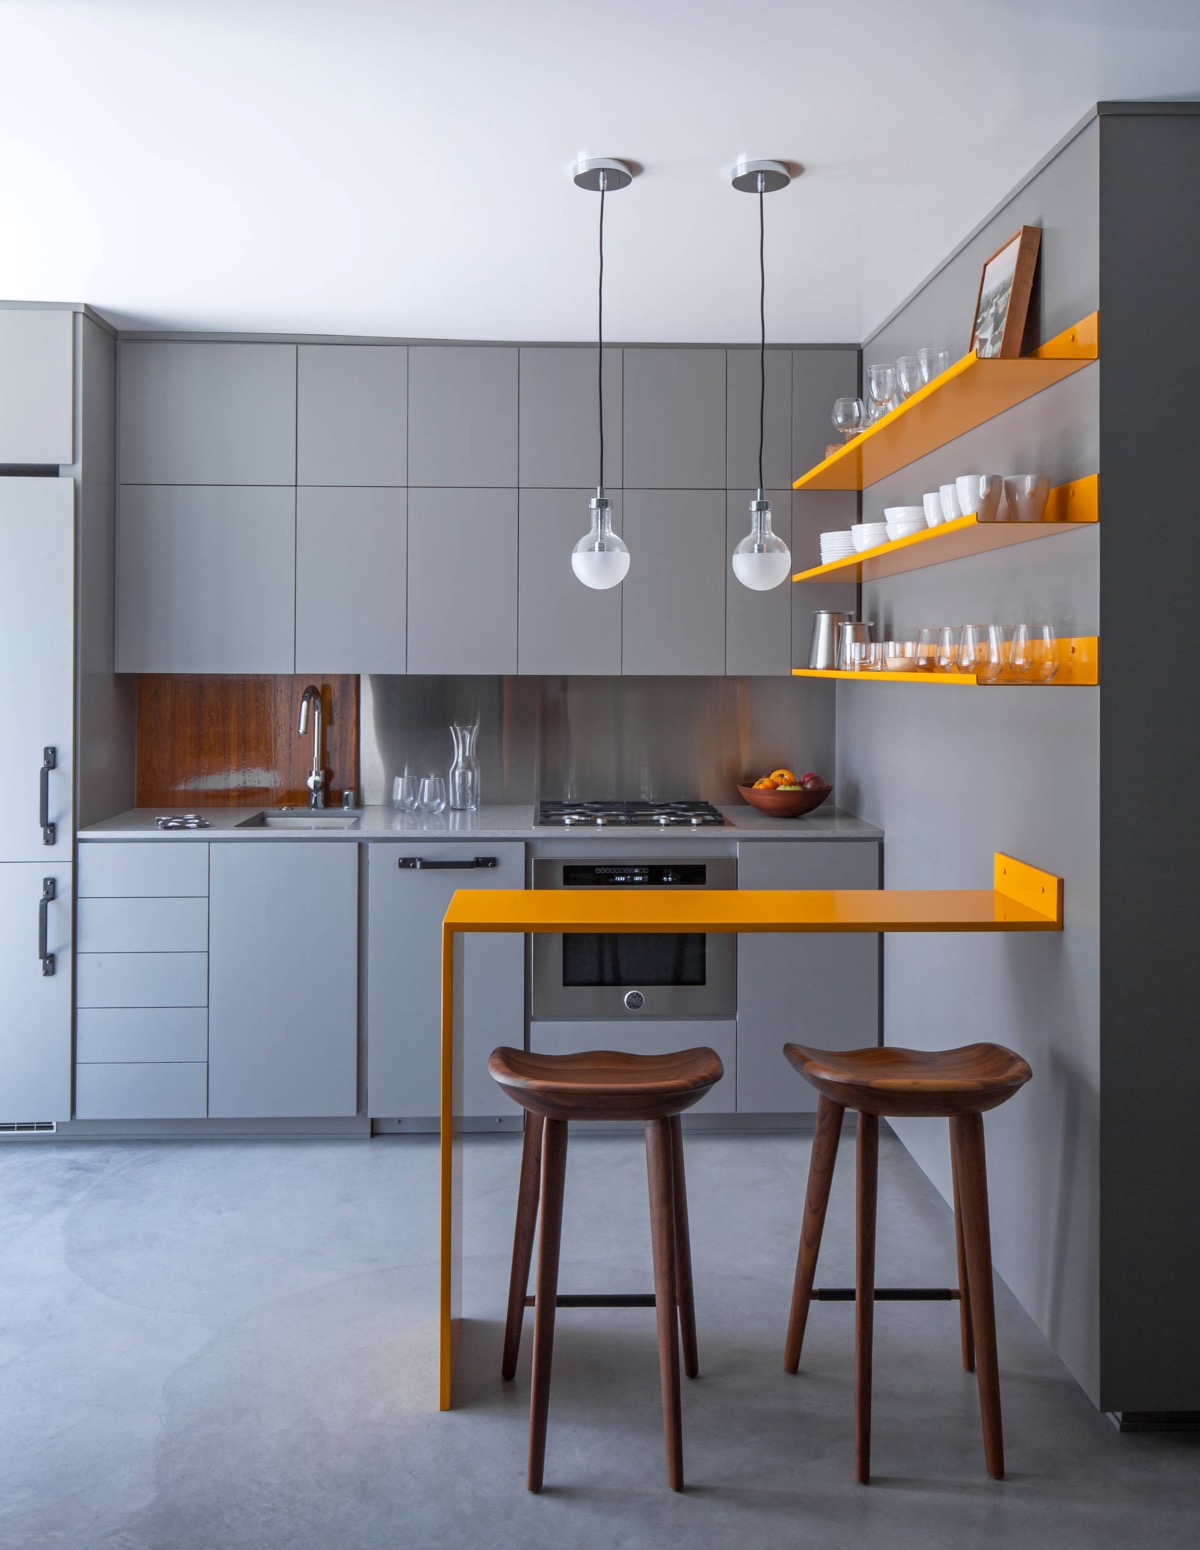 20 Splendid Small Kitchens And Ideas You Can Use From Them